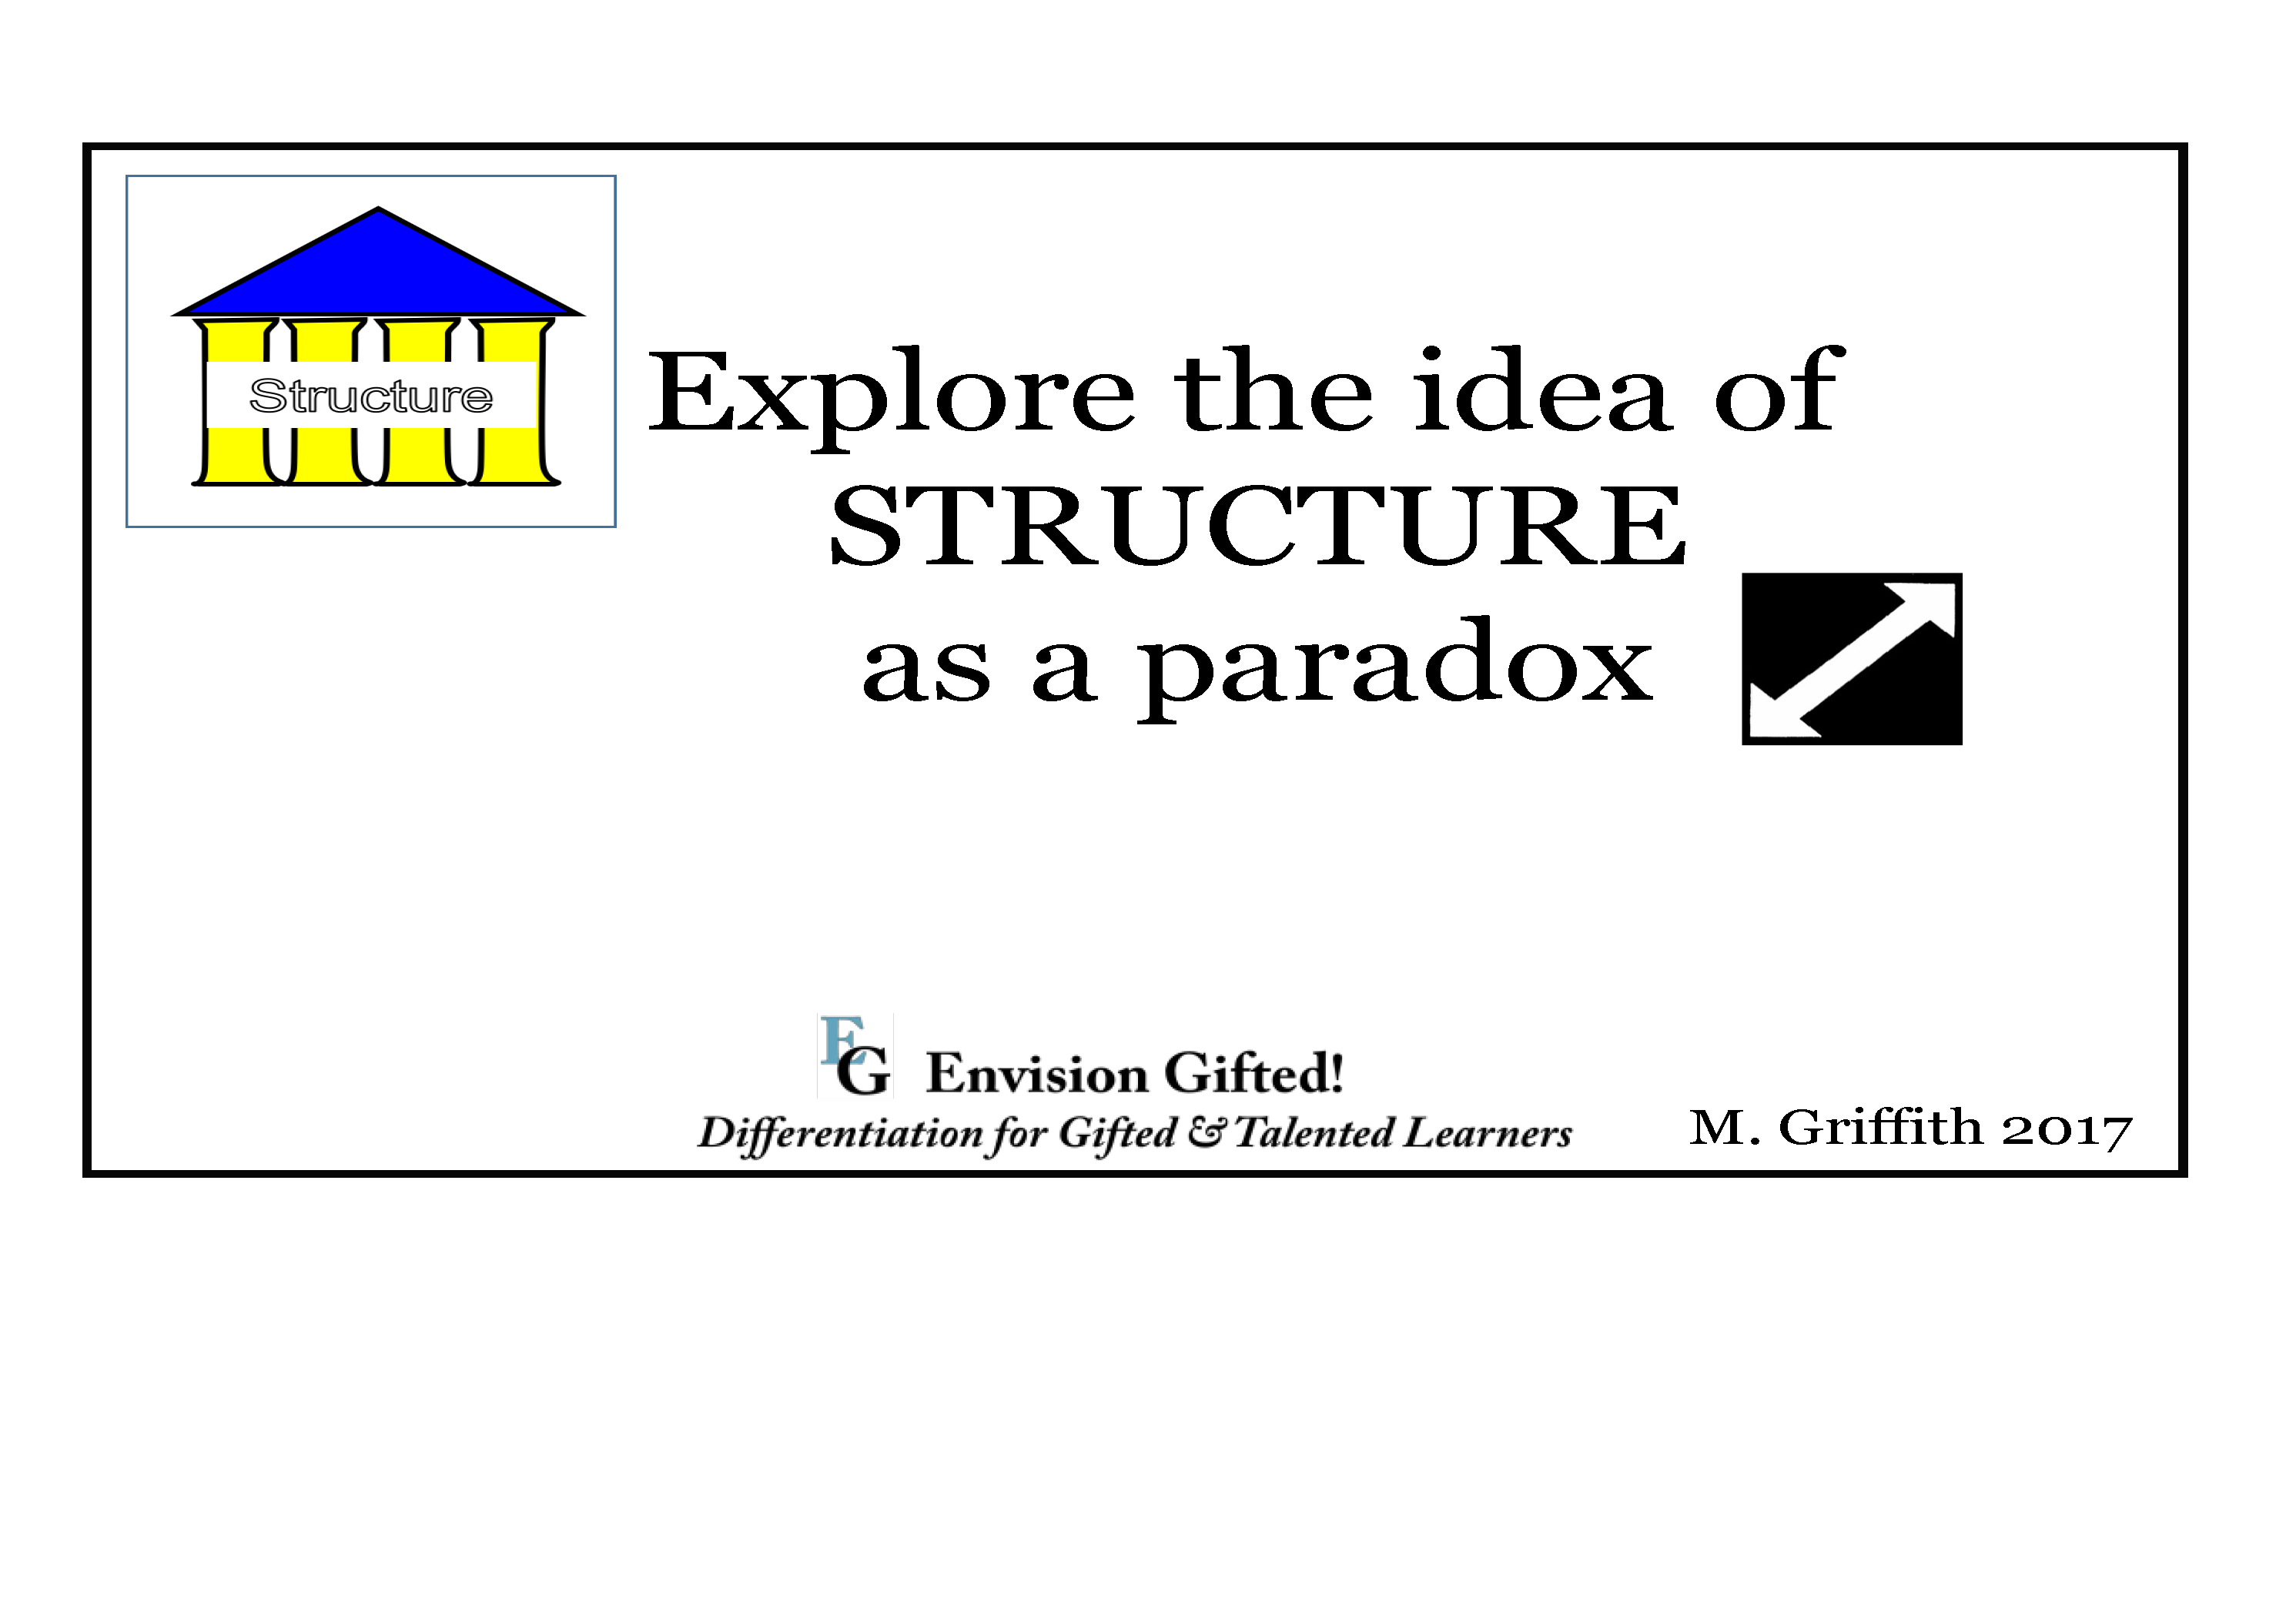 Envision Gifted. Universal Theme. Structure as Paradox